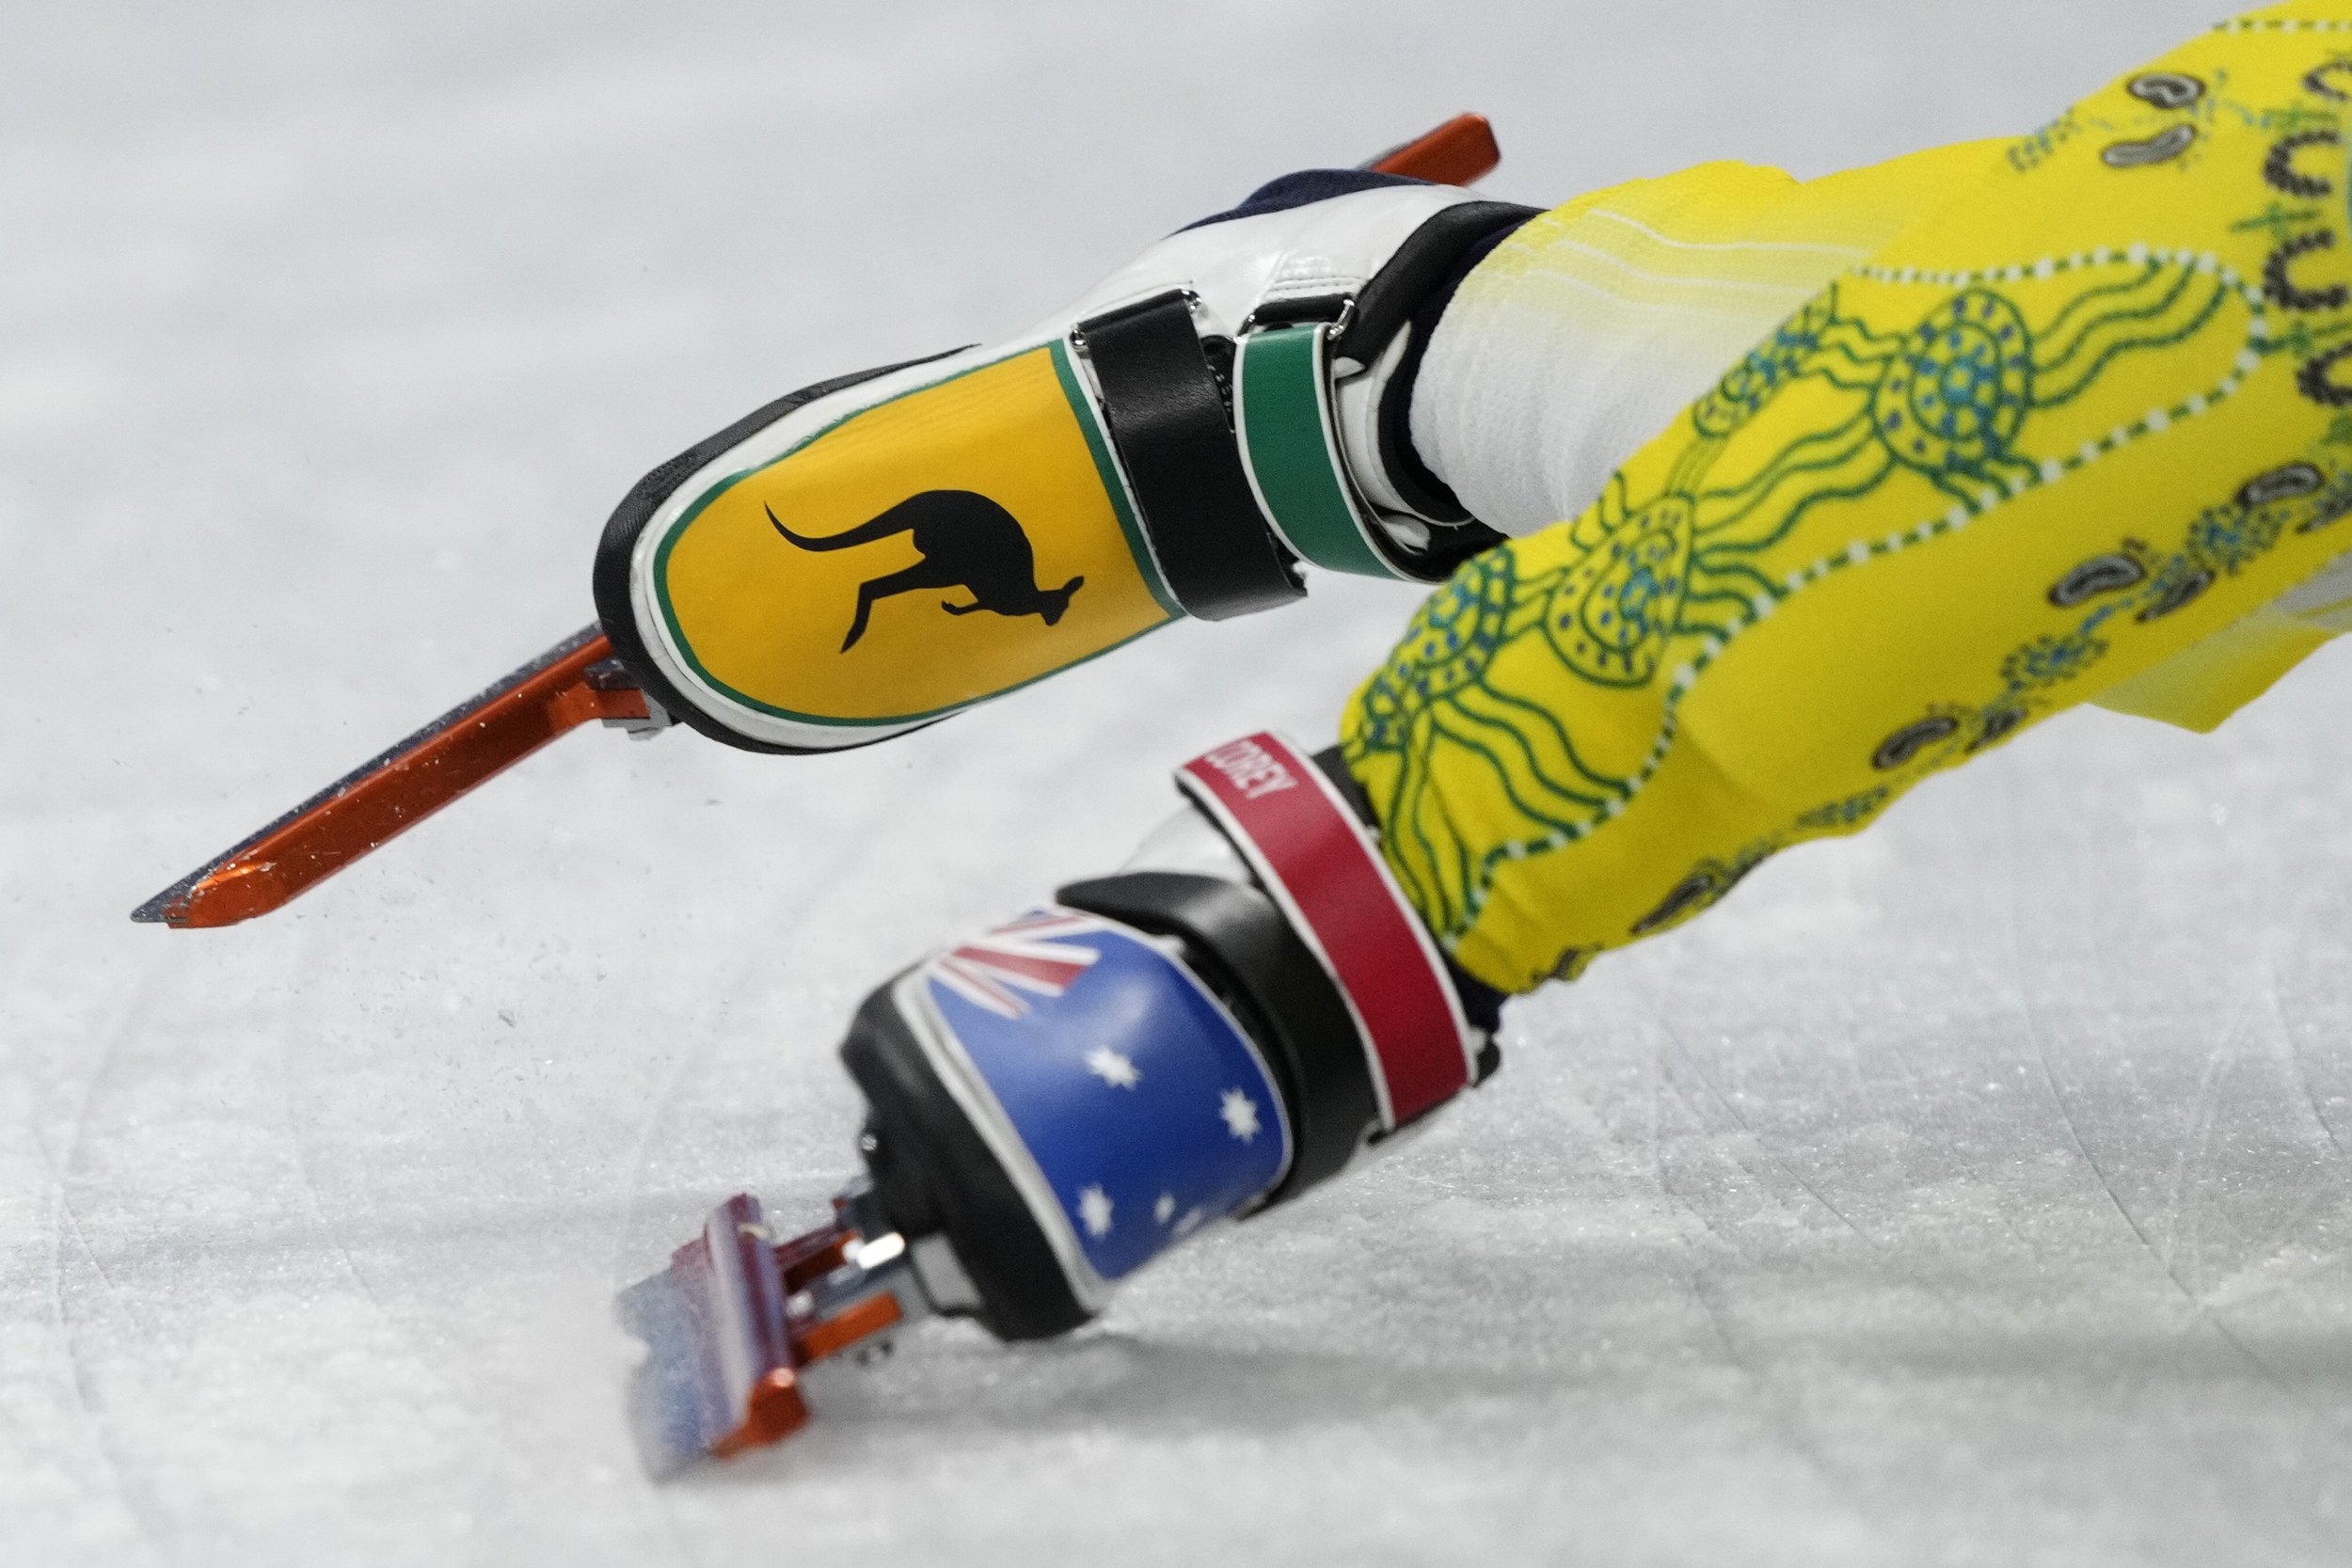  Brendan Corey of Australia, prepares for his quarterfinal of the men's 1,000-meter during the short track speedskating competition at the 2022 Winter Olympics, Monday, Feb. 7, 2022, in Beijing. (AP Photo/Bernat Armangue) 